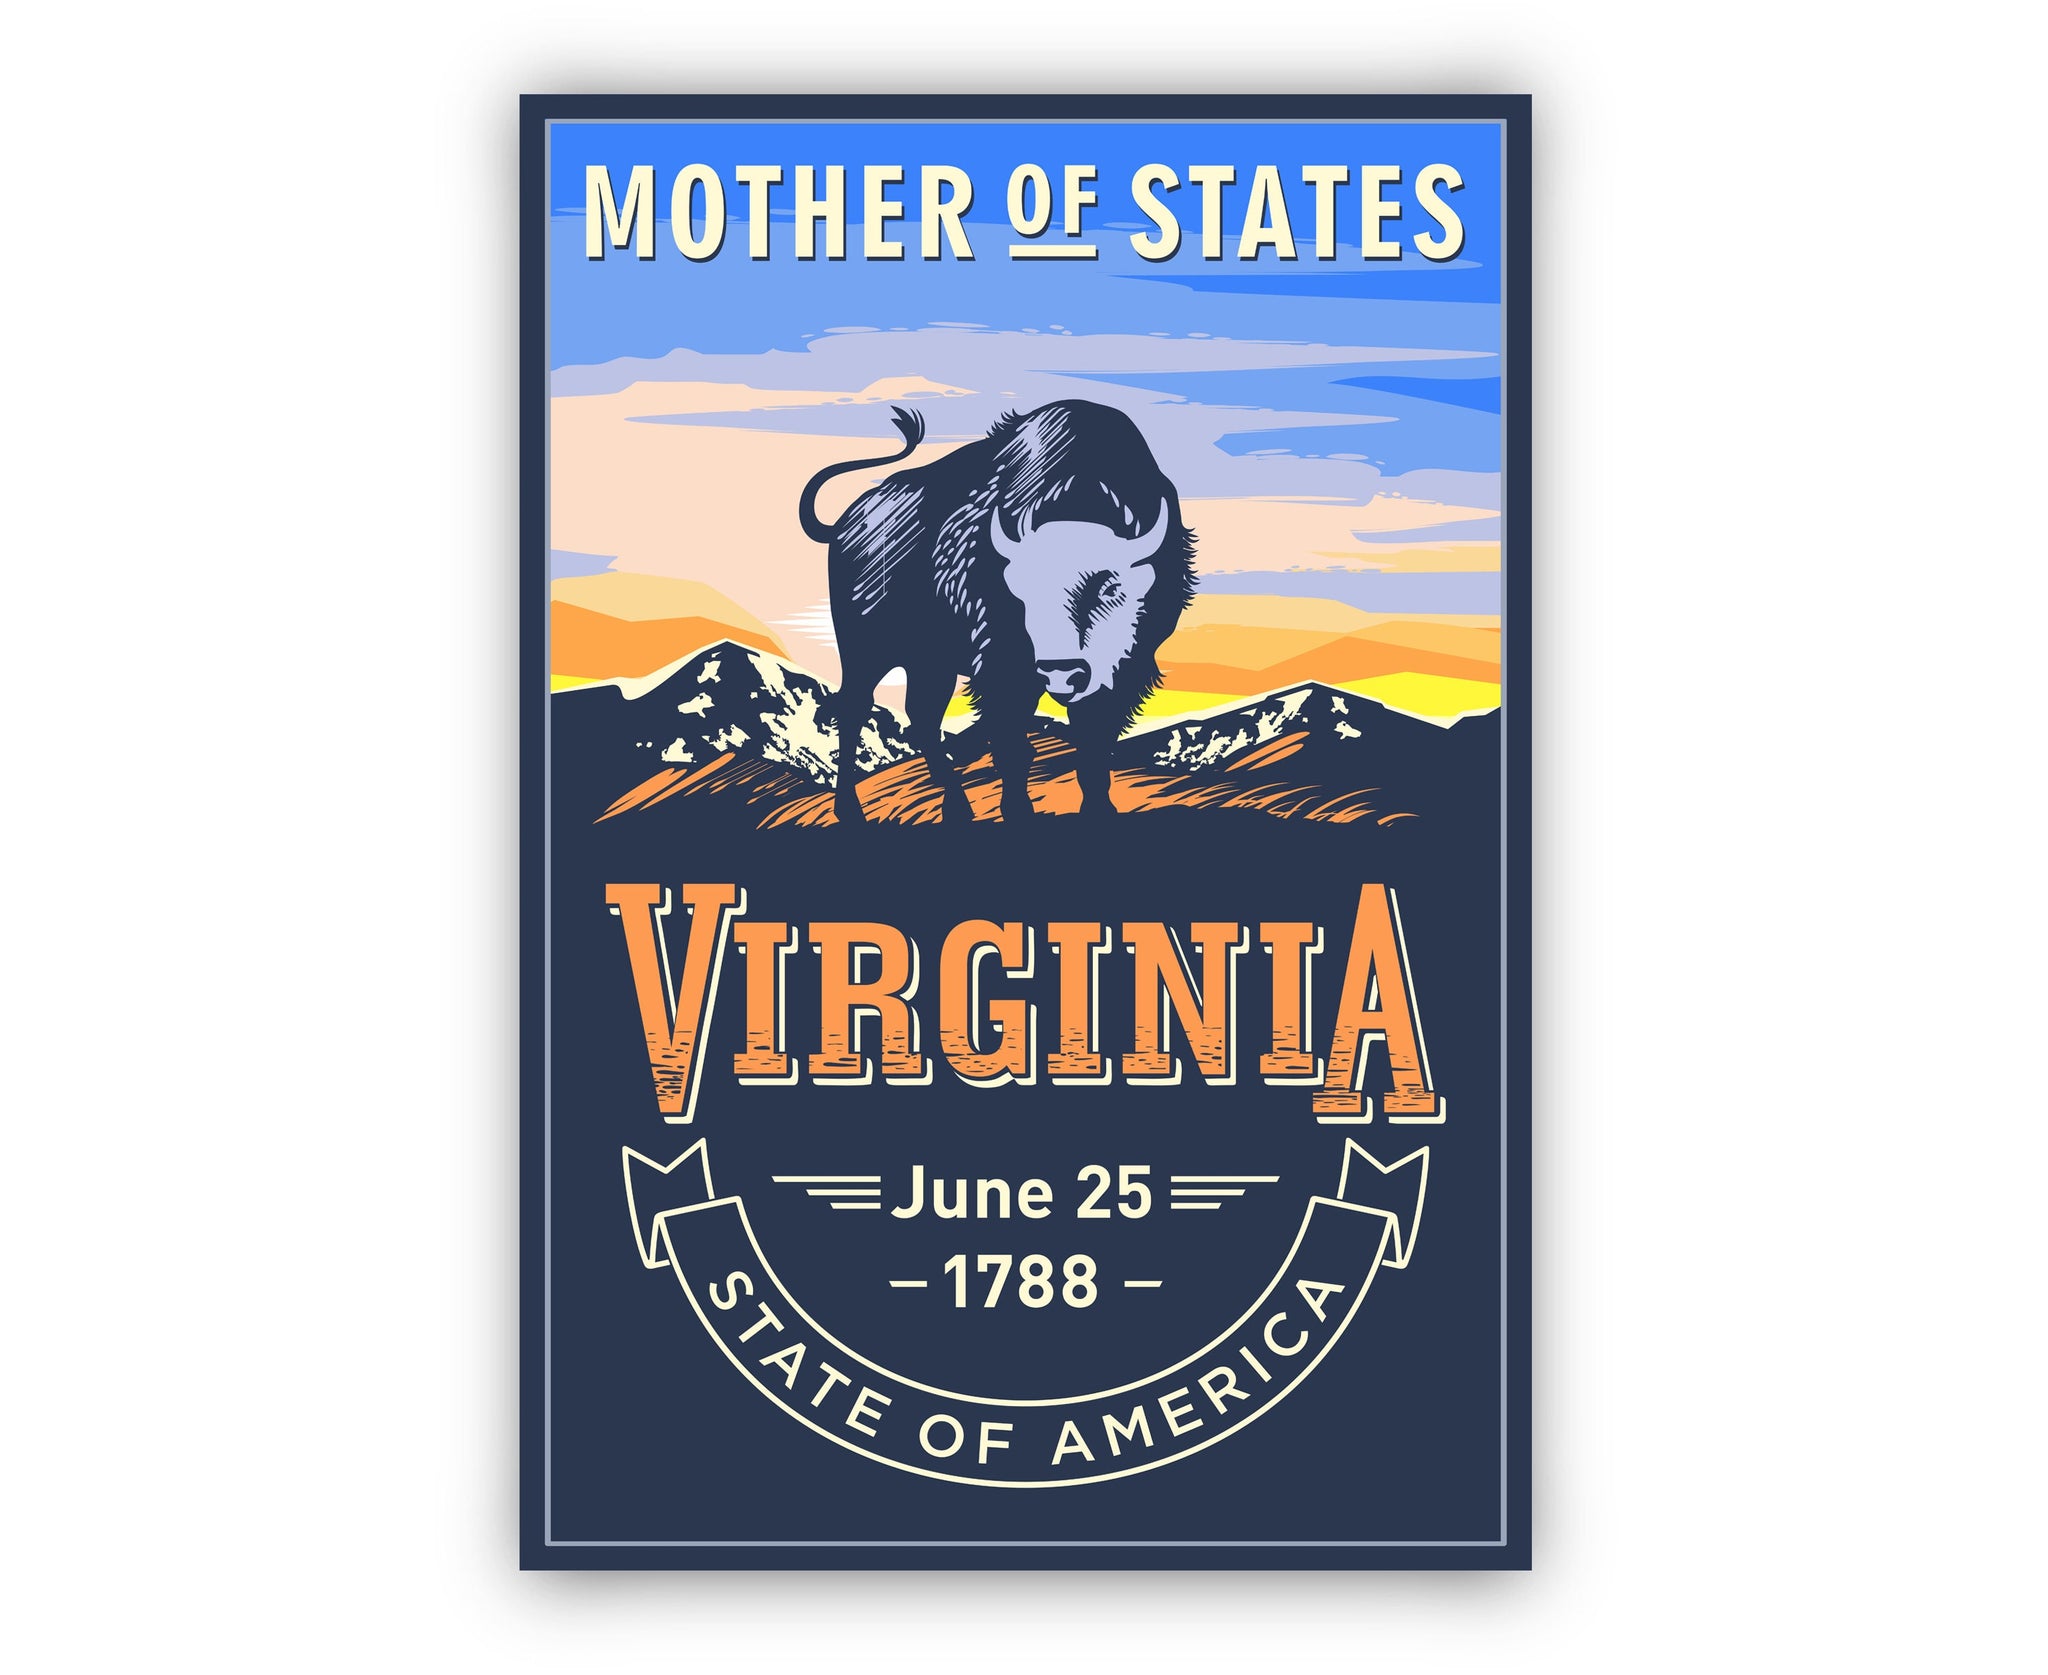 United States Poster, Virginia State Poster Print, Virginia State Emblem Poster, Retro Travel State Poster, Home Wall Art, Office Wall Art